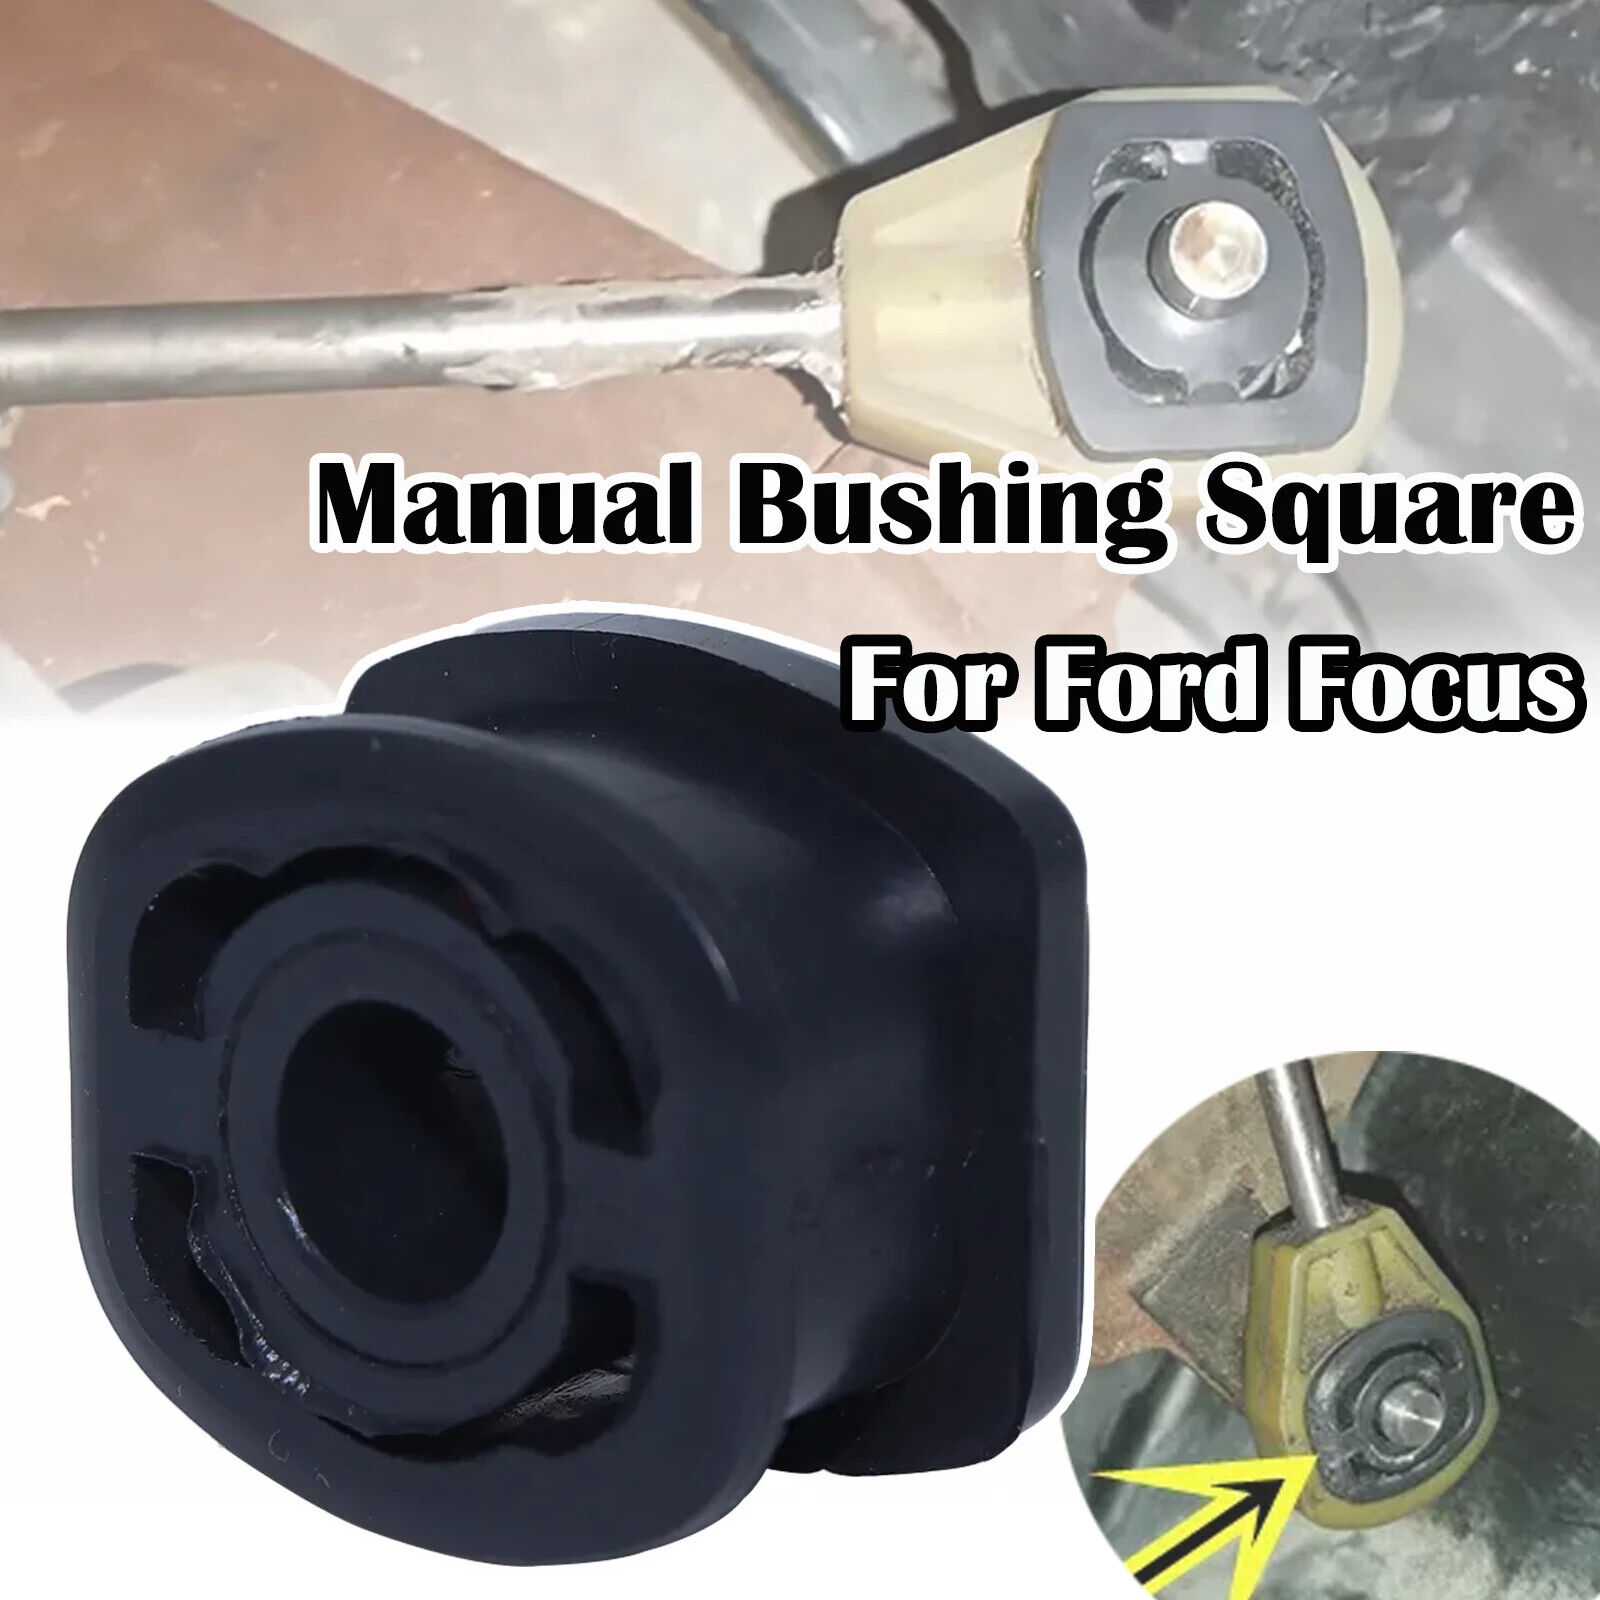 2Pc Shift Cable Bushing Repair Replacement Kit Manual Transmision For Ford Focus